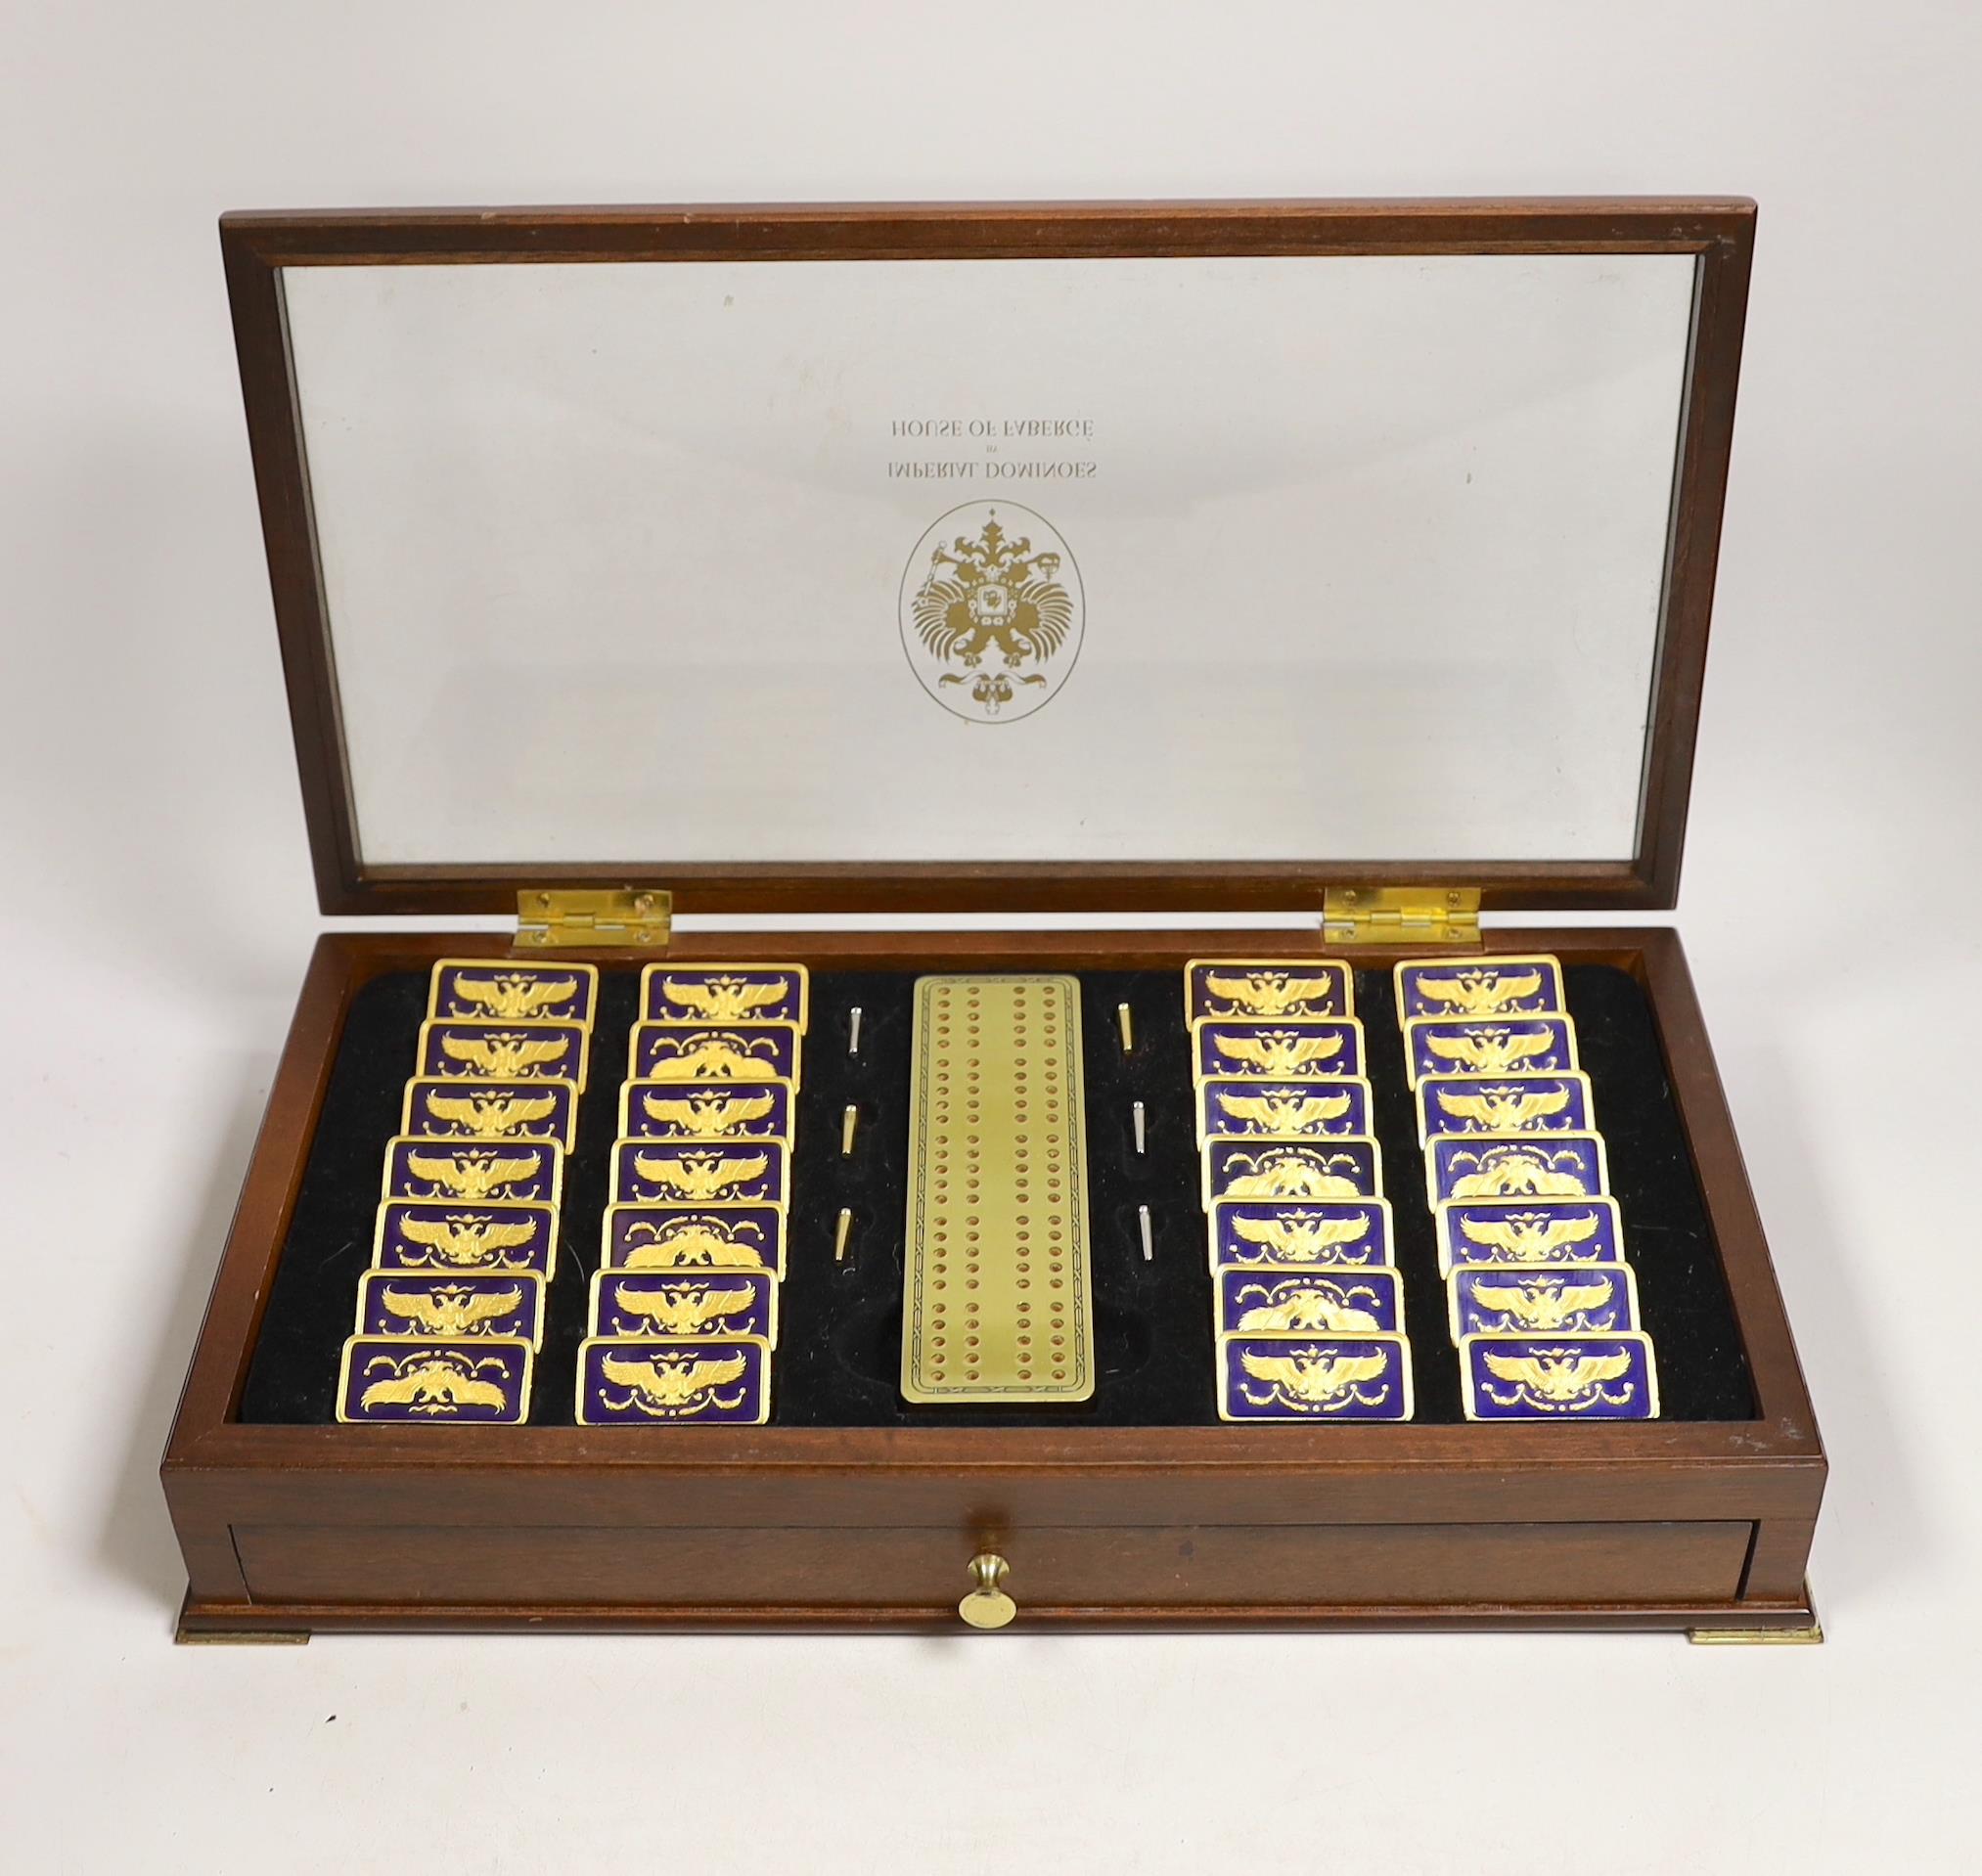 Imperial Dominoes set by House of Faberge